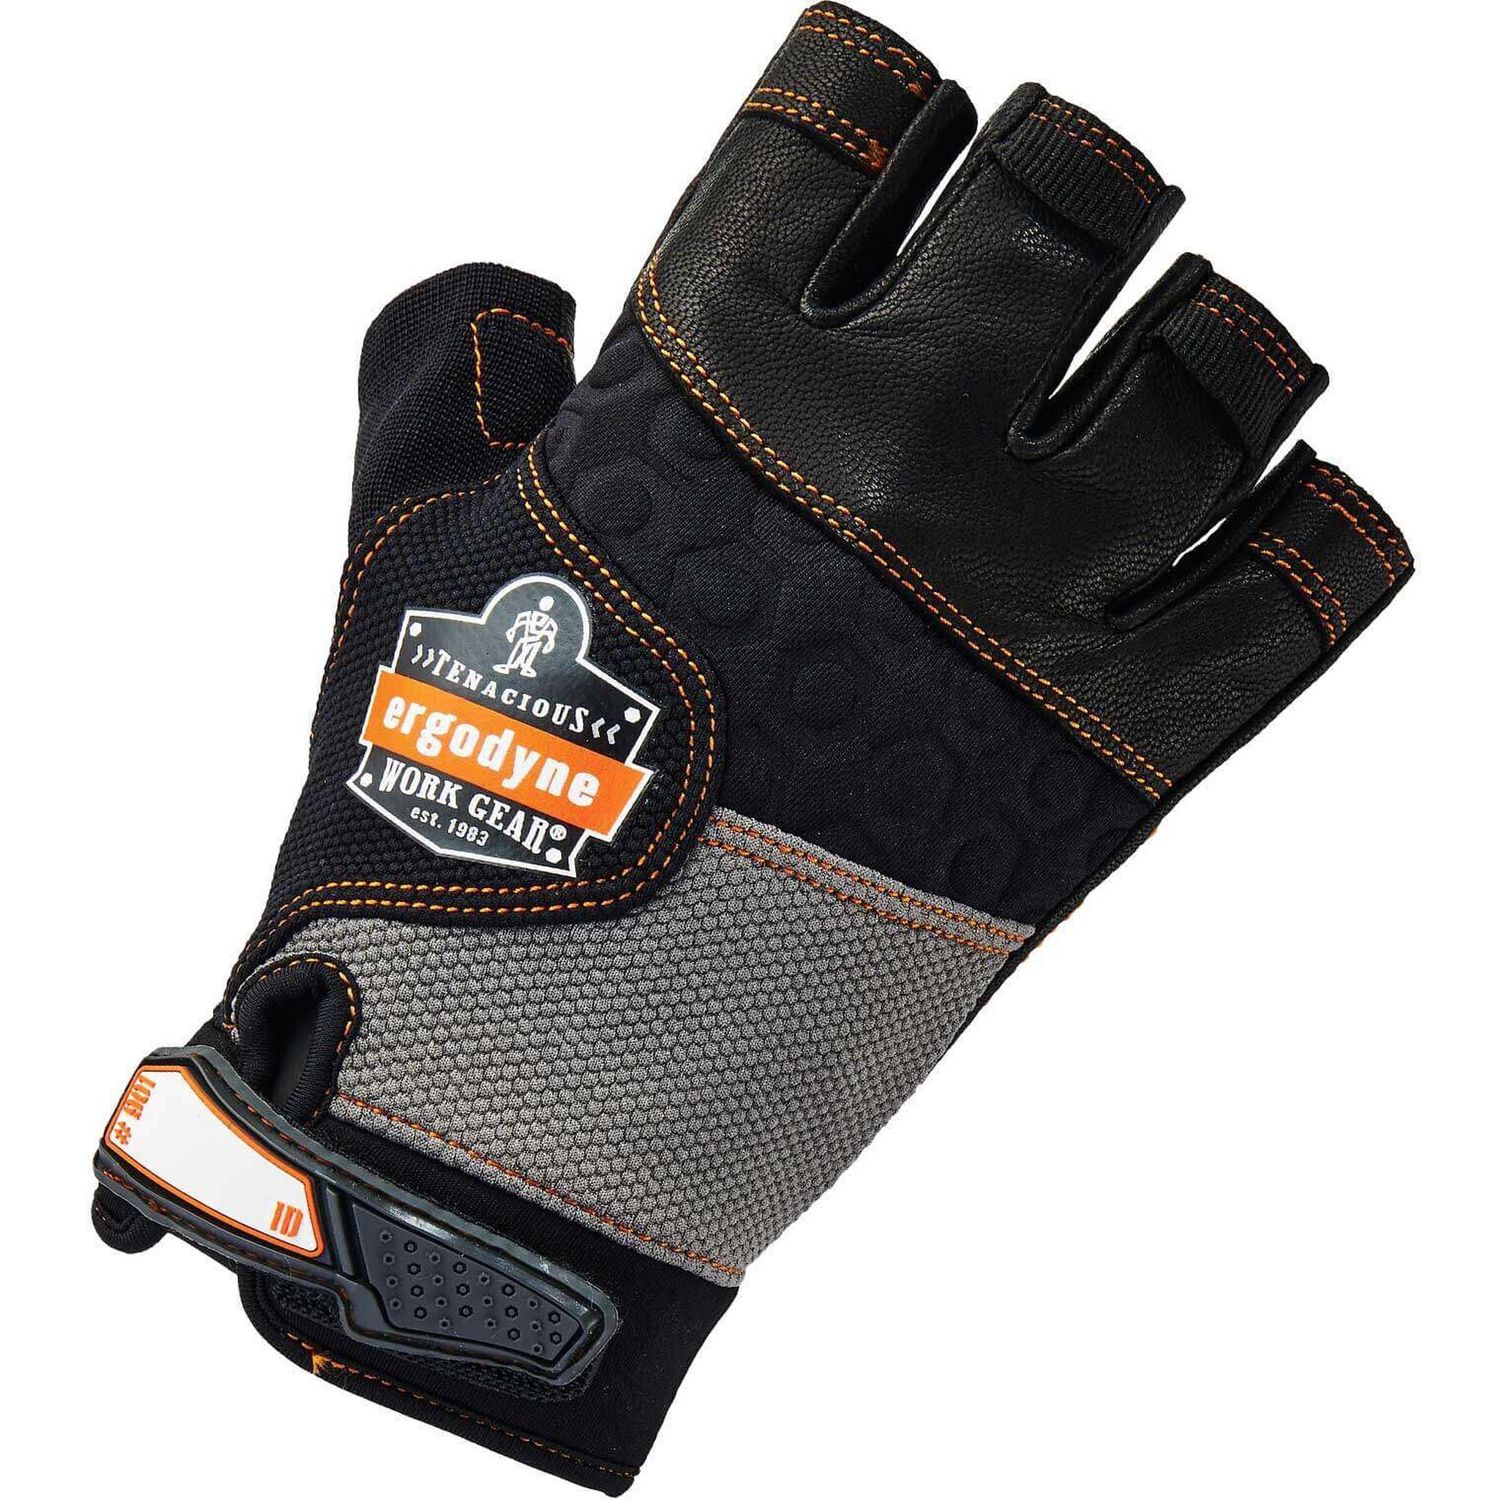 901 Half-Finger Leather Impact Gloves Small Size, Neoprene Knuckle Pad, Leather Palm, Foam Palm Pad, Spandex, Black